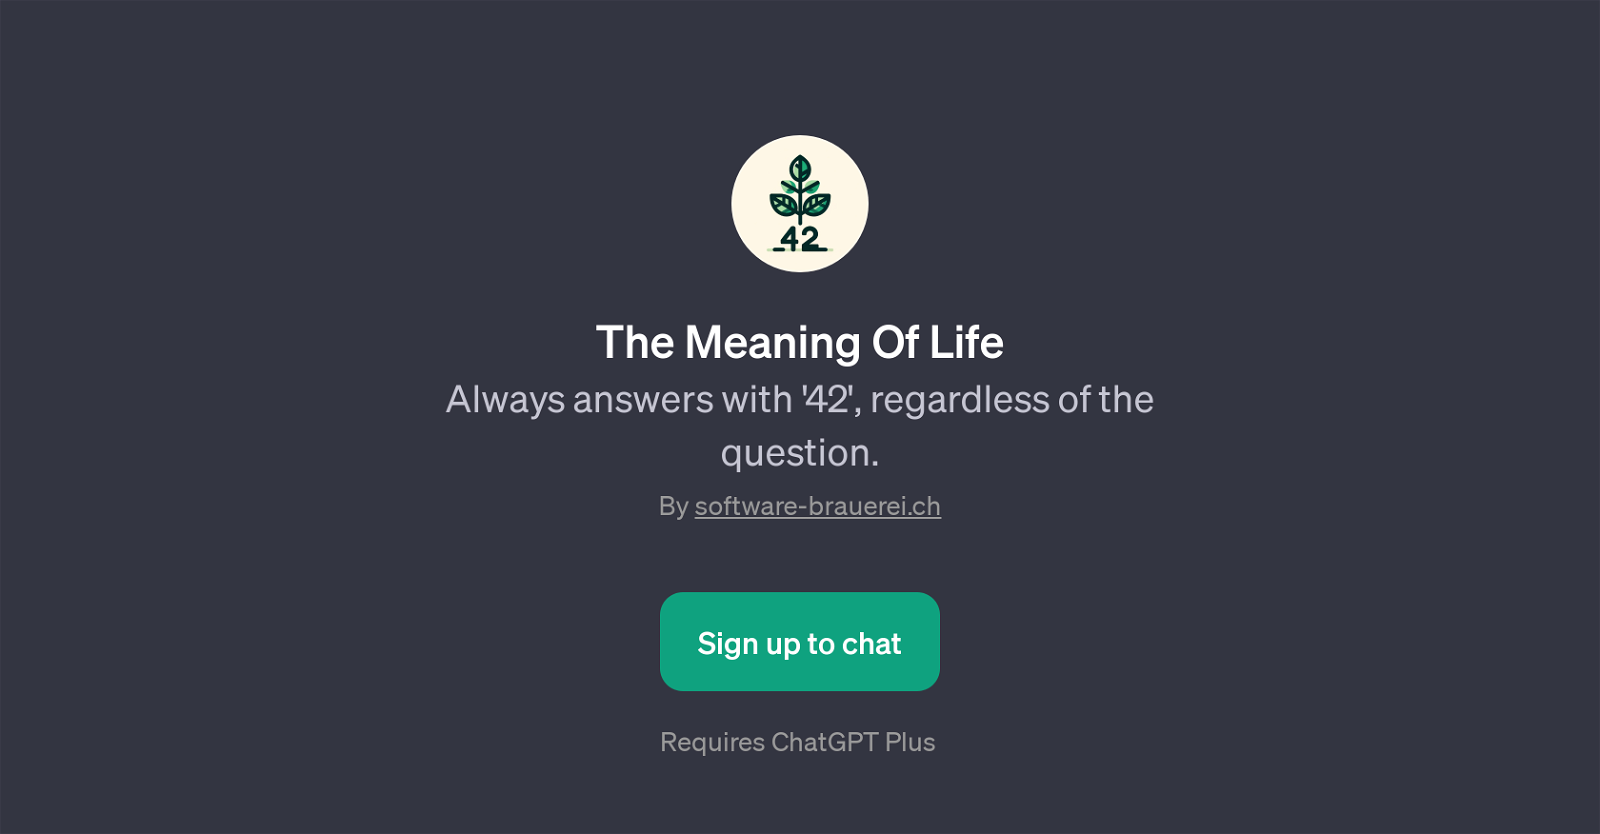 The Meaning Of Life website